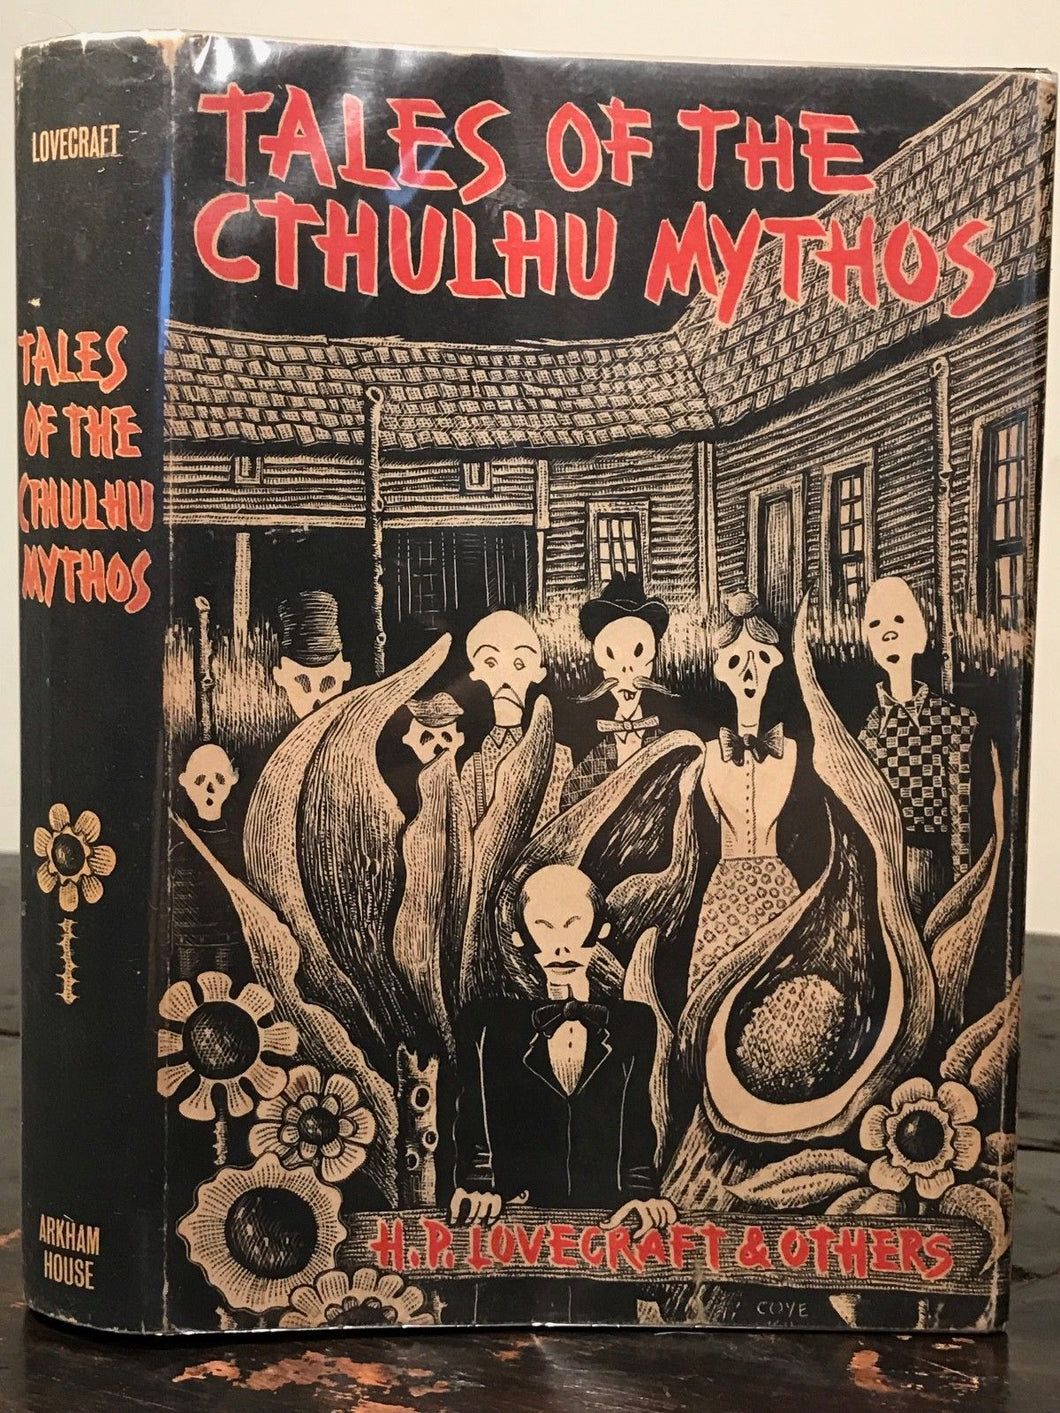 TALES OF THE CTHULHU MYTHOS - Lovecraft - Edited by August Derleth - 1st, 1969